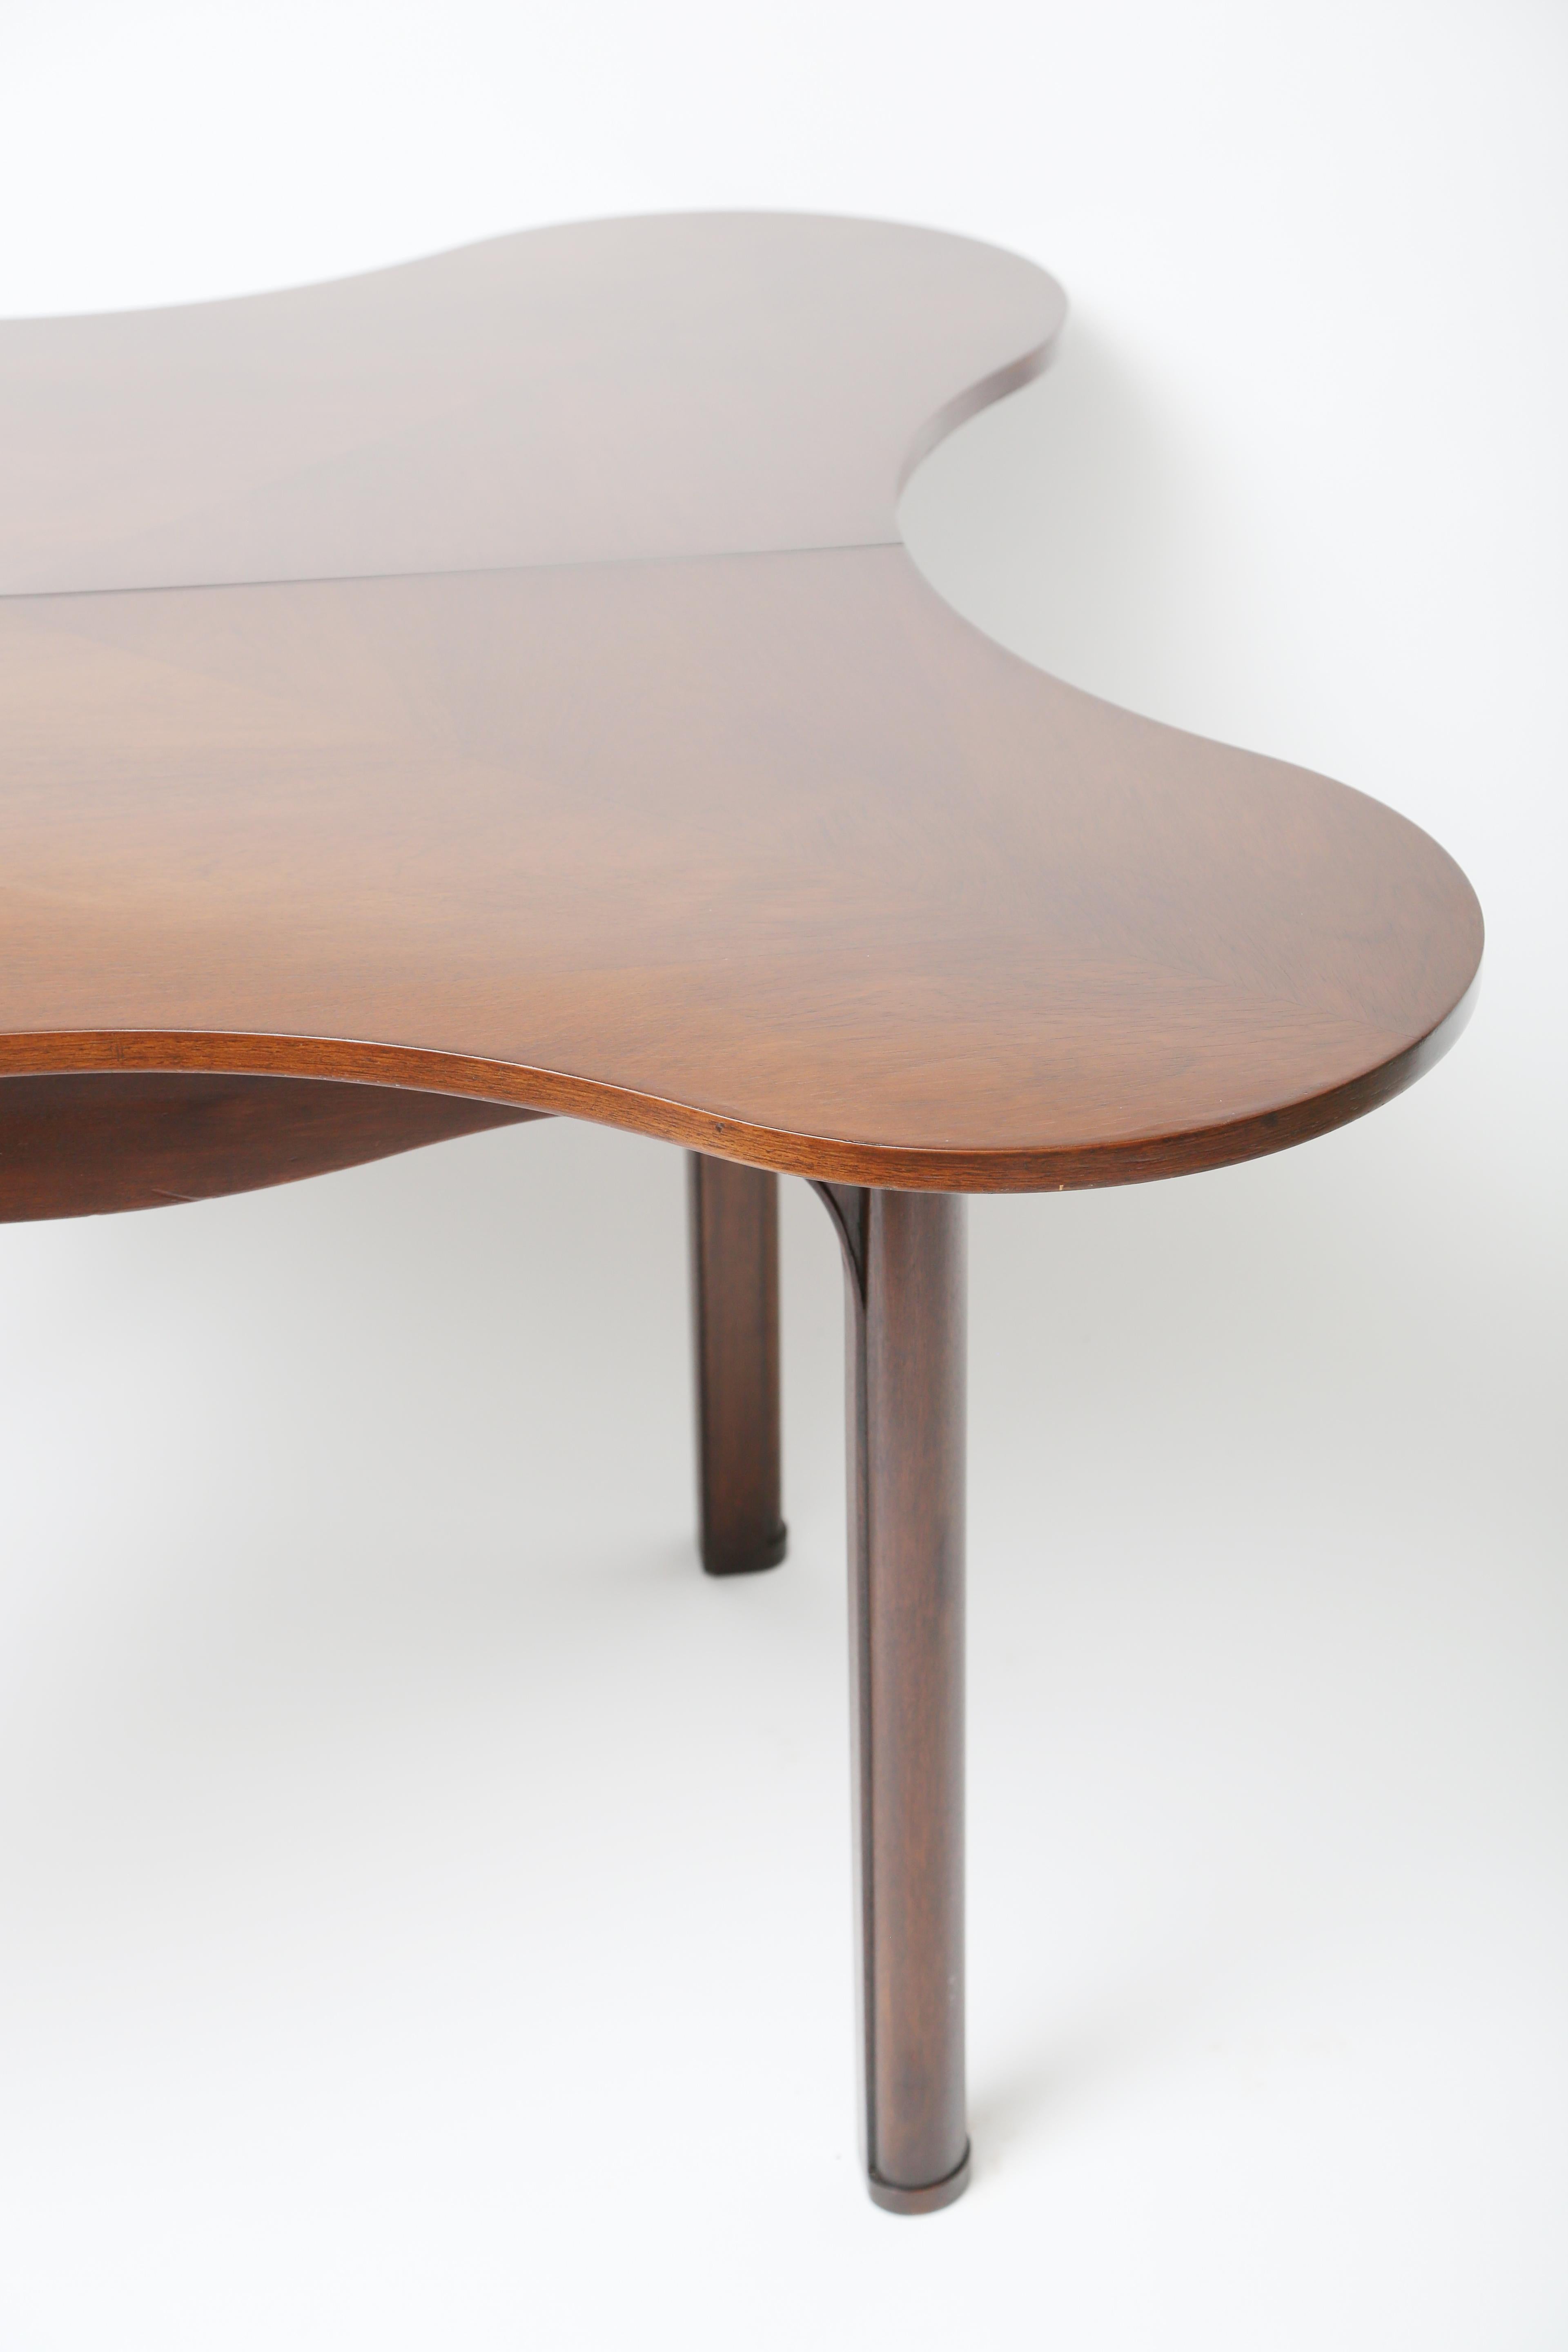 Mid-20th Century Edward Wormley Special Order Drop-Front Clover Shaped Table